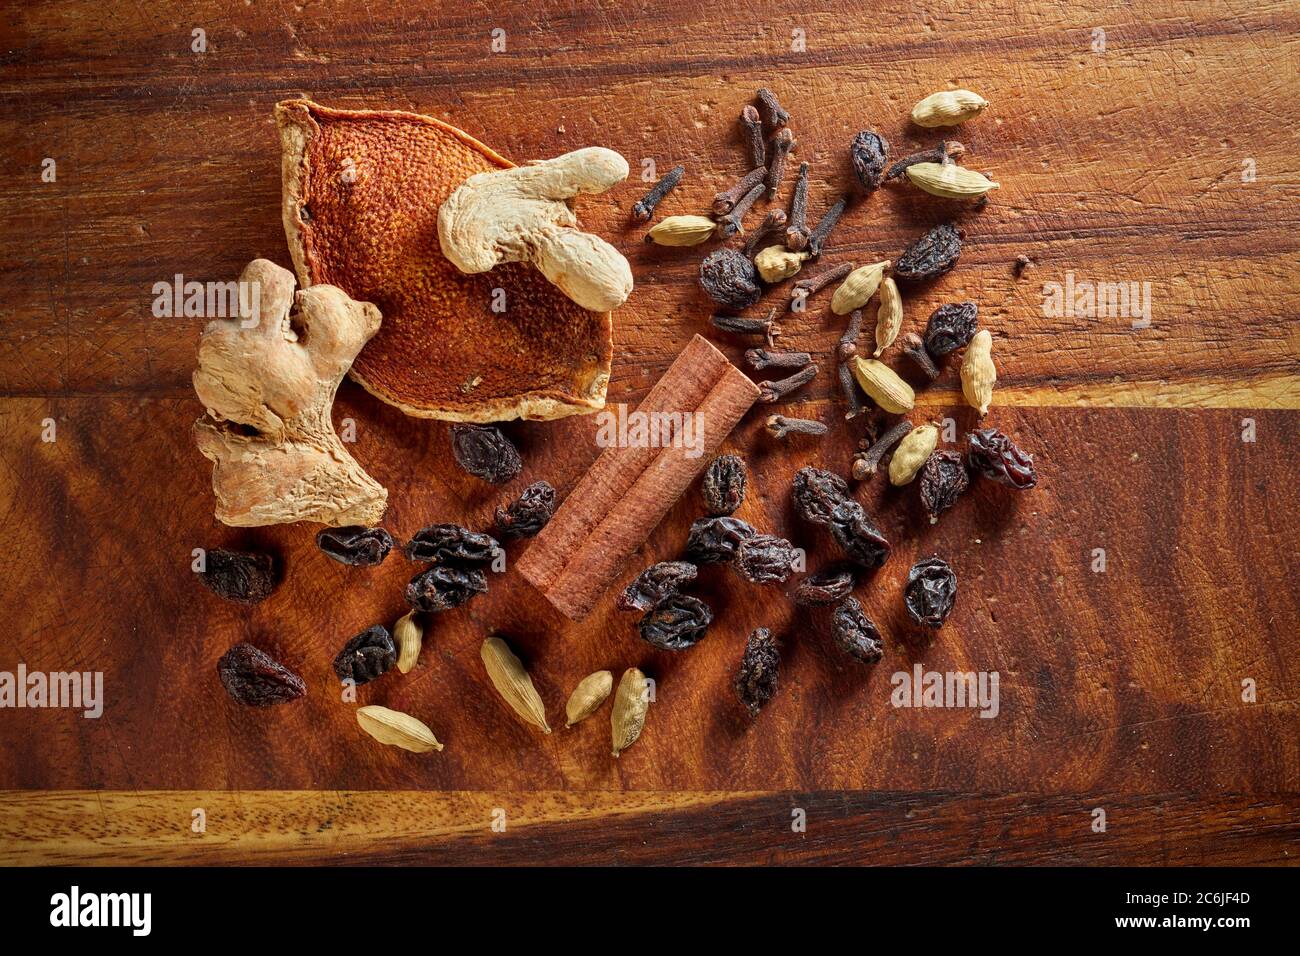 A mix of dry mulling spices (ginger, orange rind, raisins, cloves, cinnamon stick, cardamom pods) on wooden board. Stock Photo